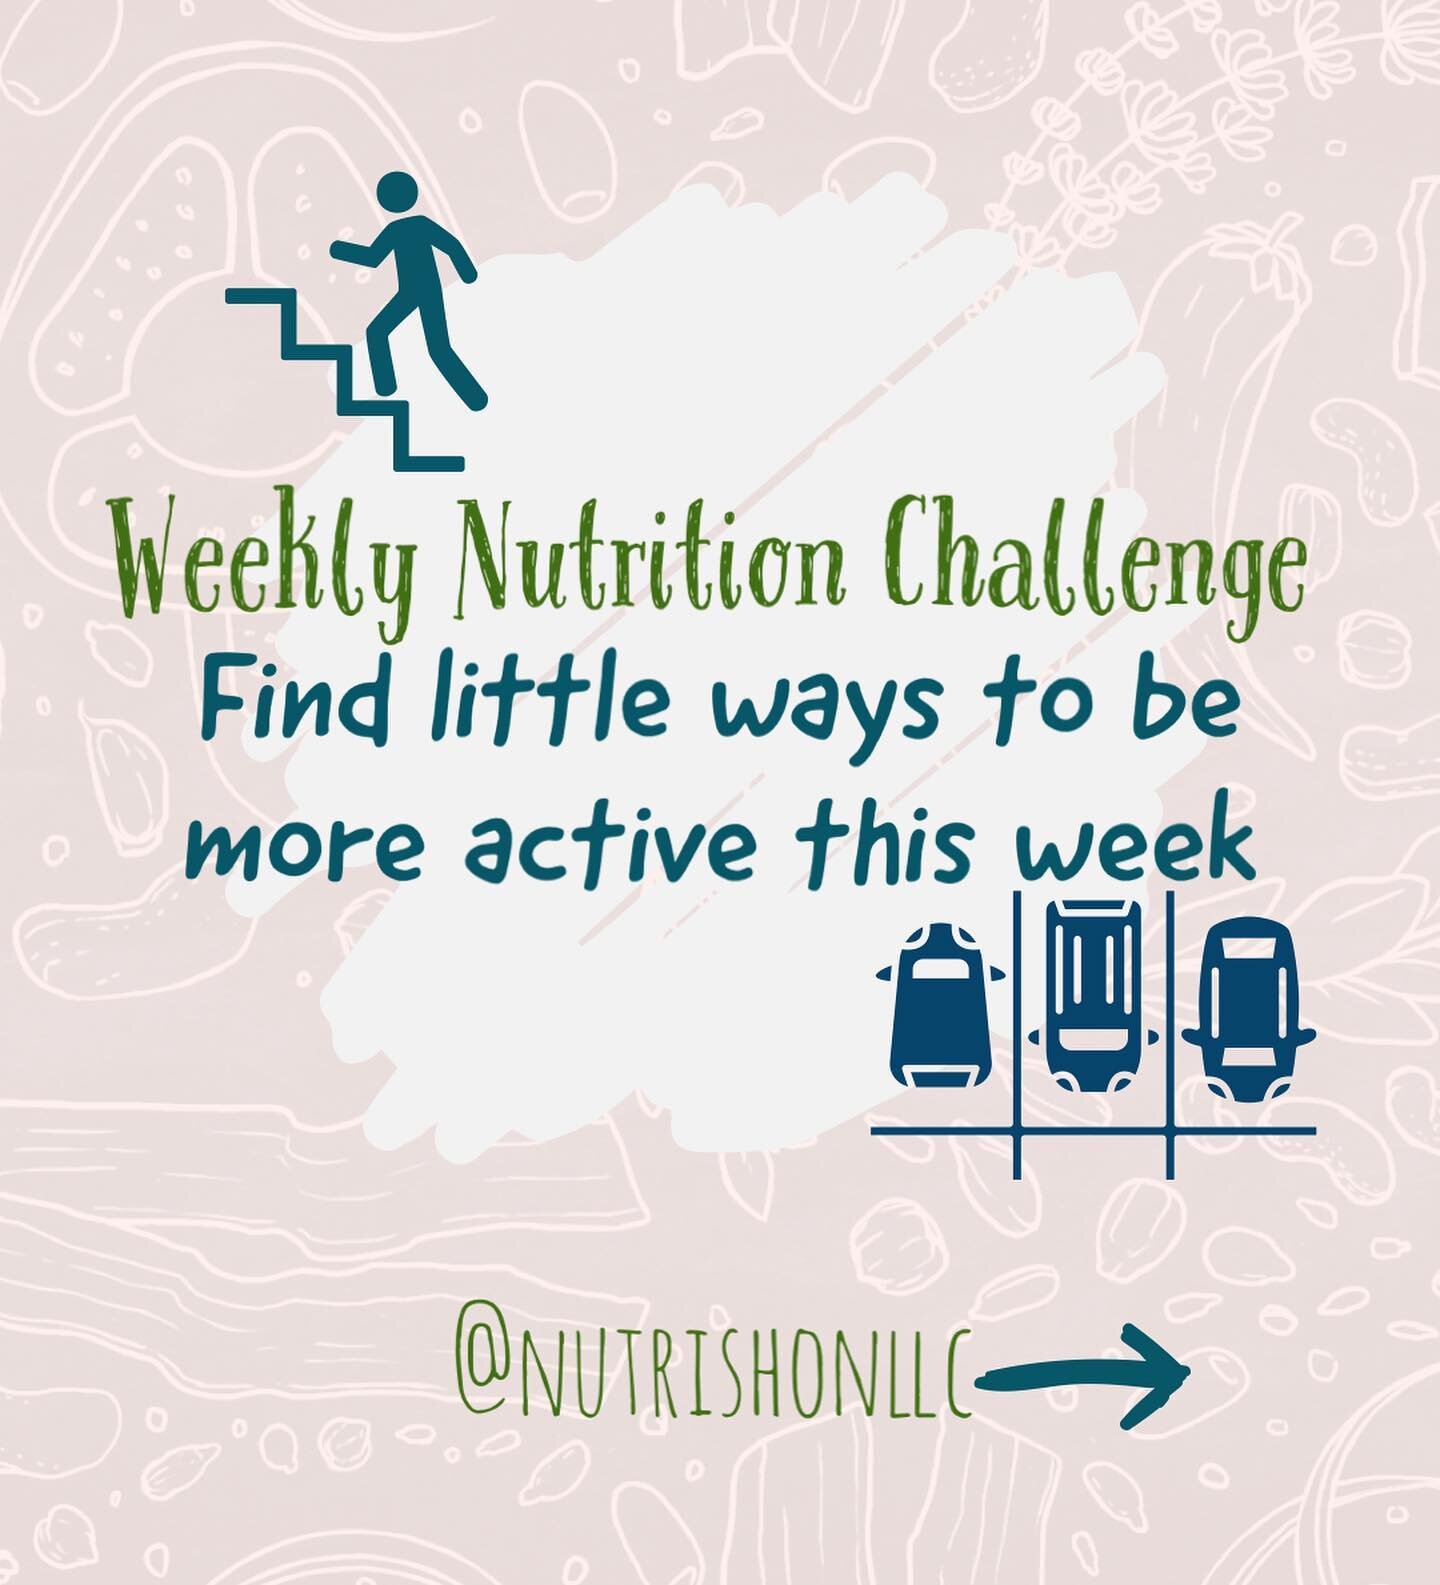 &ldquo;❤️&rdquo; this post to accept the challenge!

Whether it&rsquo;s taking the stairs, parking in a spot that&rsquo;s further away, or doing &ldquo;squats&rdquo; while loading your laundry in the washing machine, find little ways to incorporate m